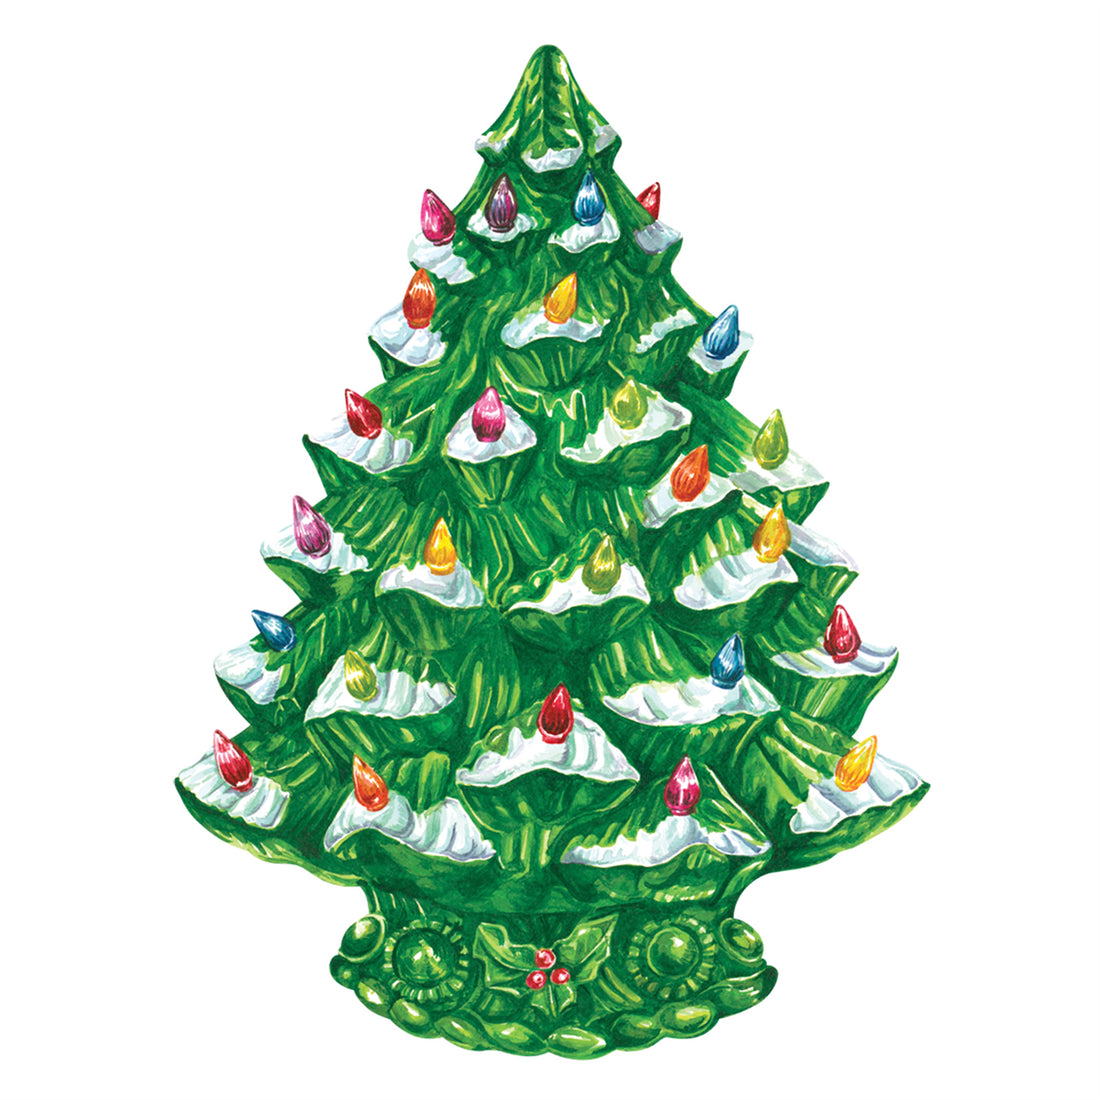 A die-cut illustration of a vintage green ceramic Christmas tree decoration, complete with snow-tipped branches and multi-colored lights.